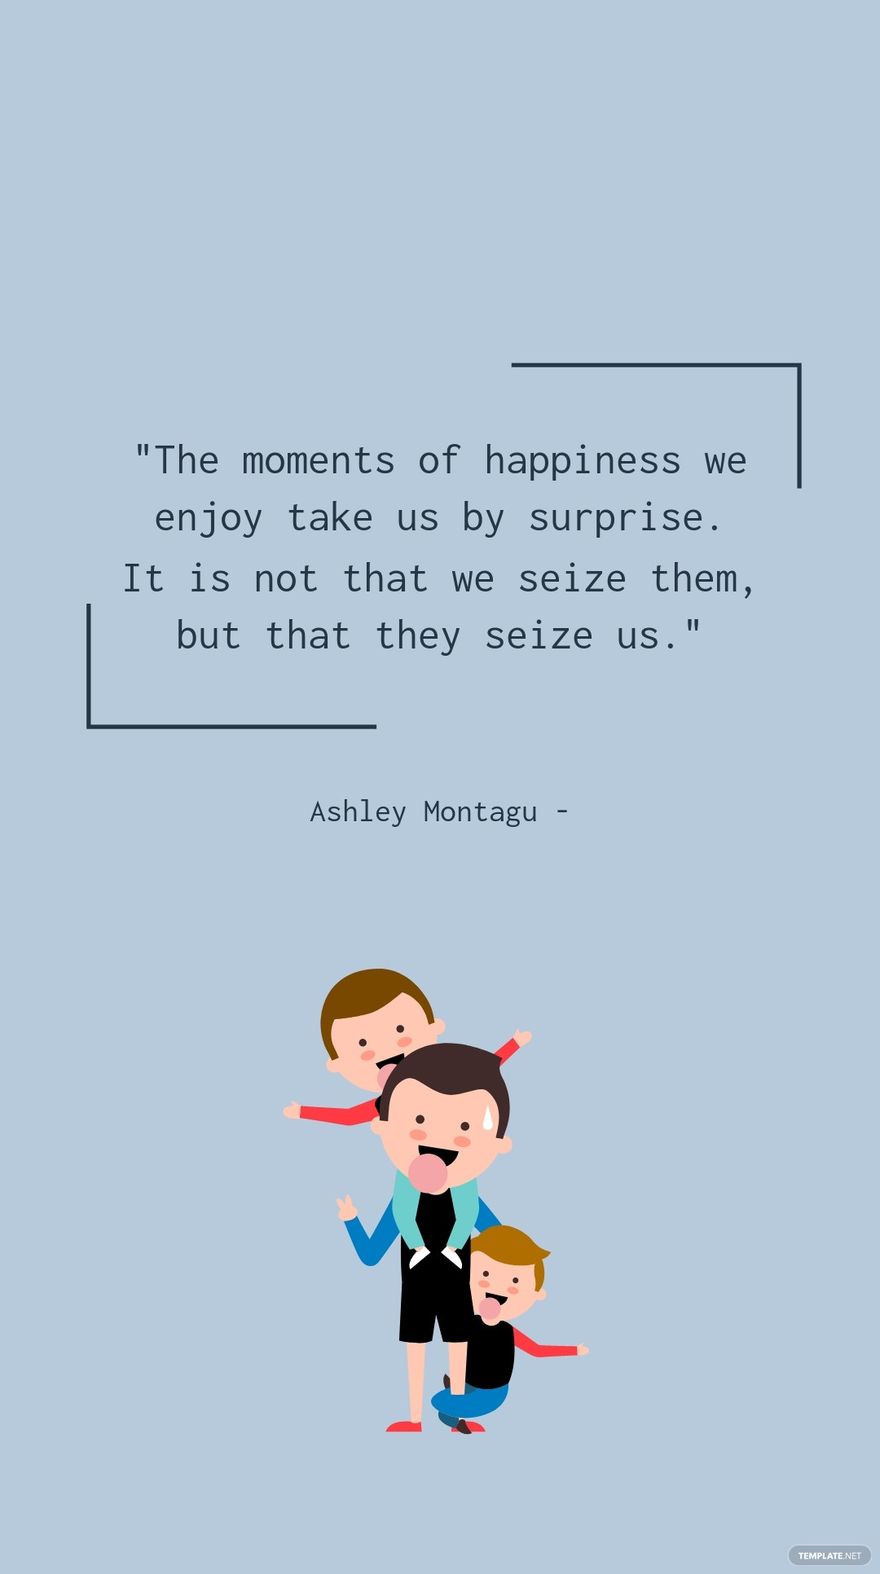 Free Ashley Montagu - The moments of happiness we enjoy take us by surprise. It is not that we seize them, but that they seize us. in JPG